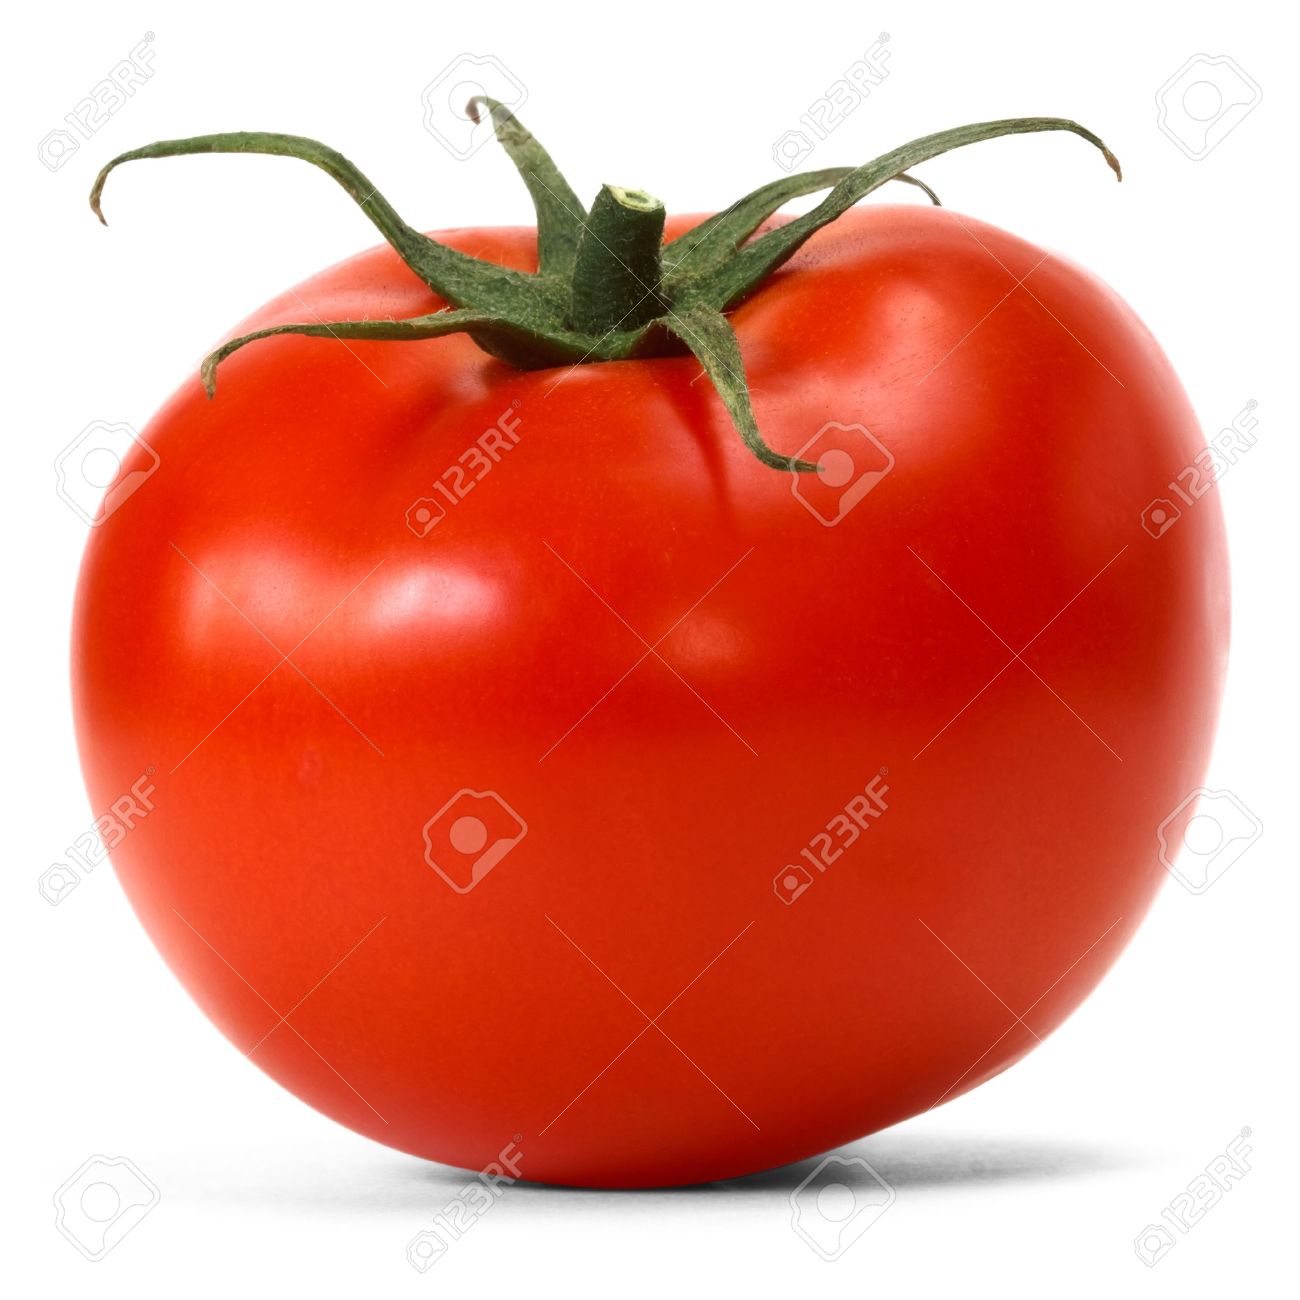 Tomato Over White Background Stock Photo Picture And Royalty